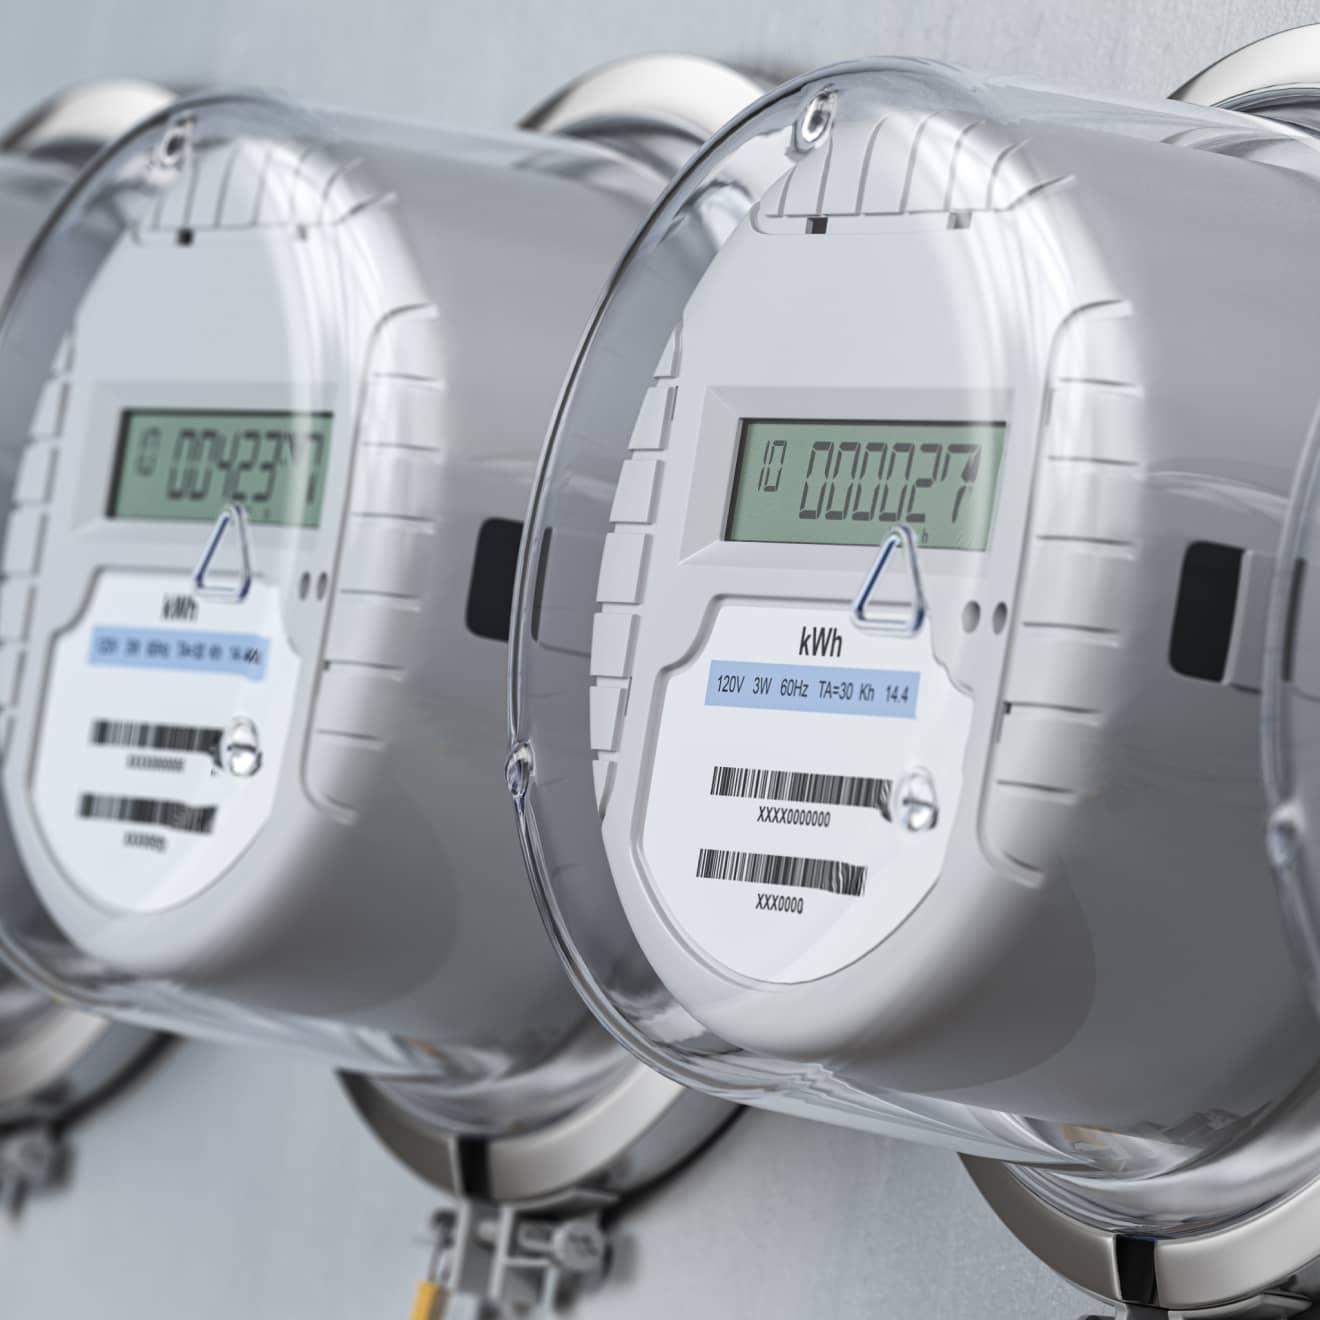 A row of electricity meters